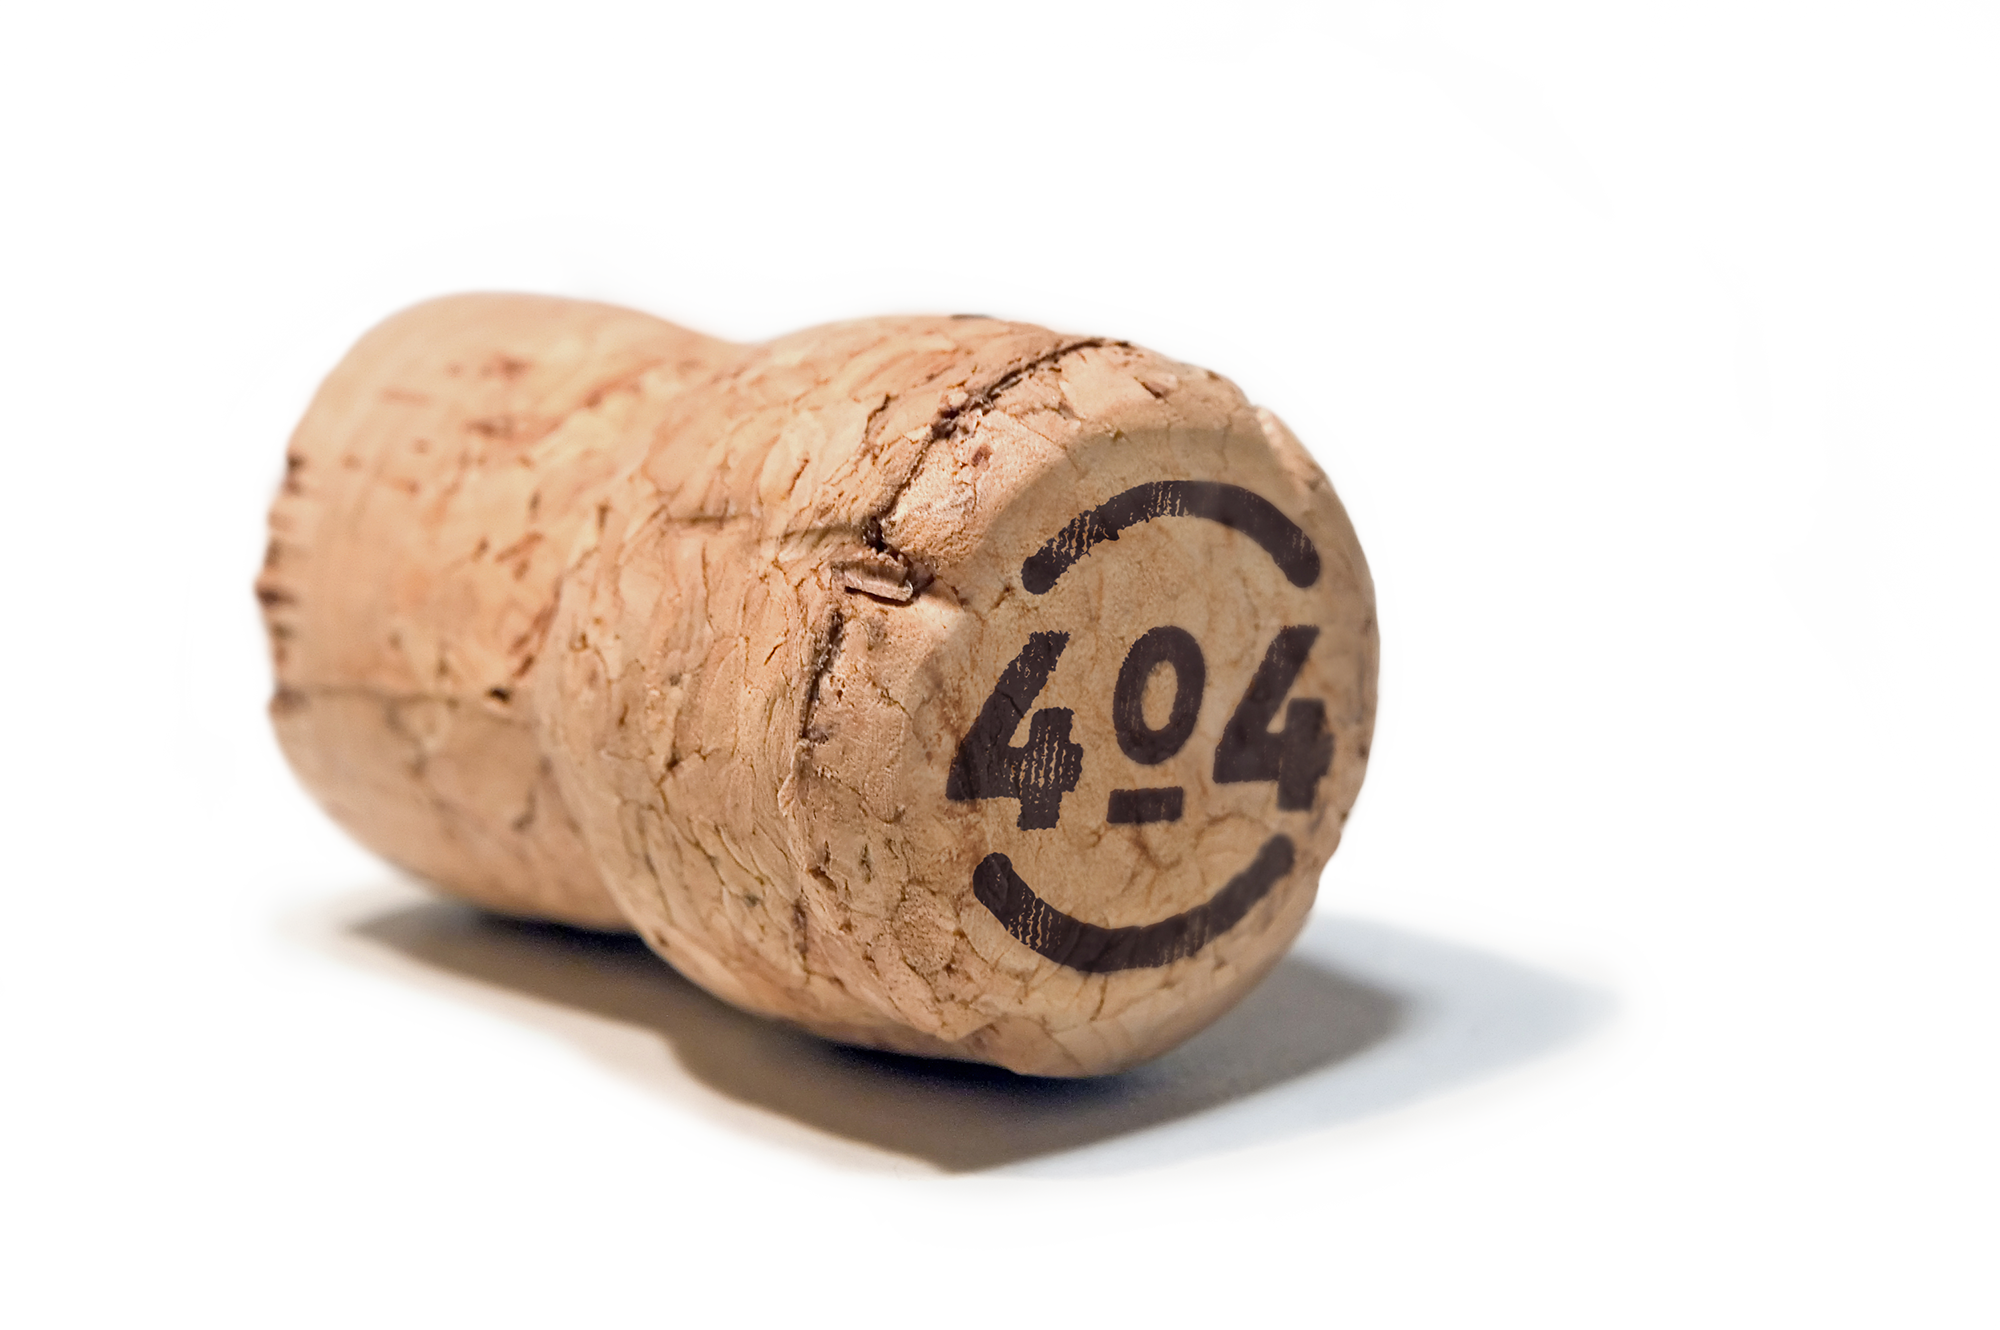 error page image of a cork with 404 message